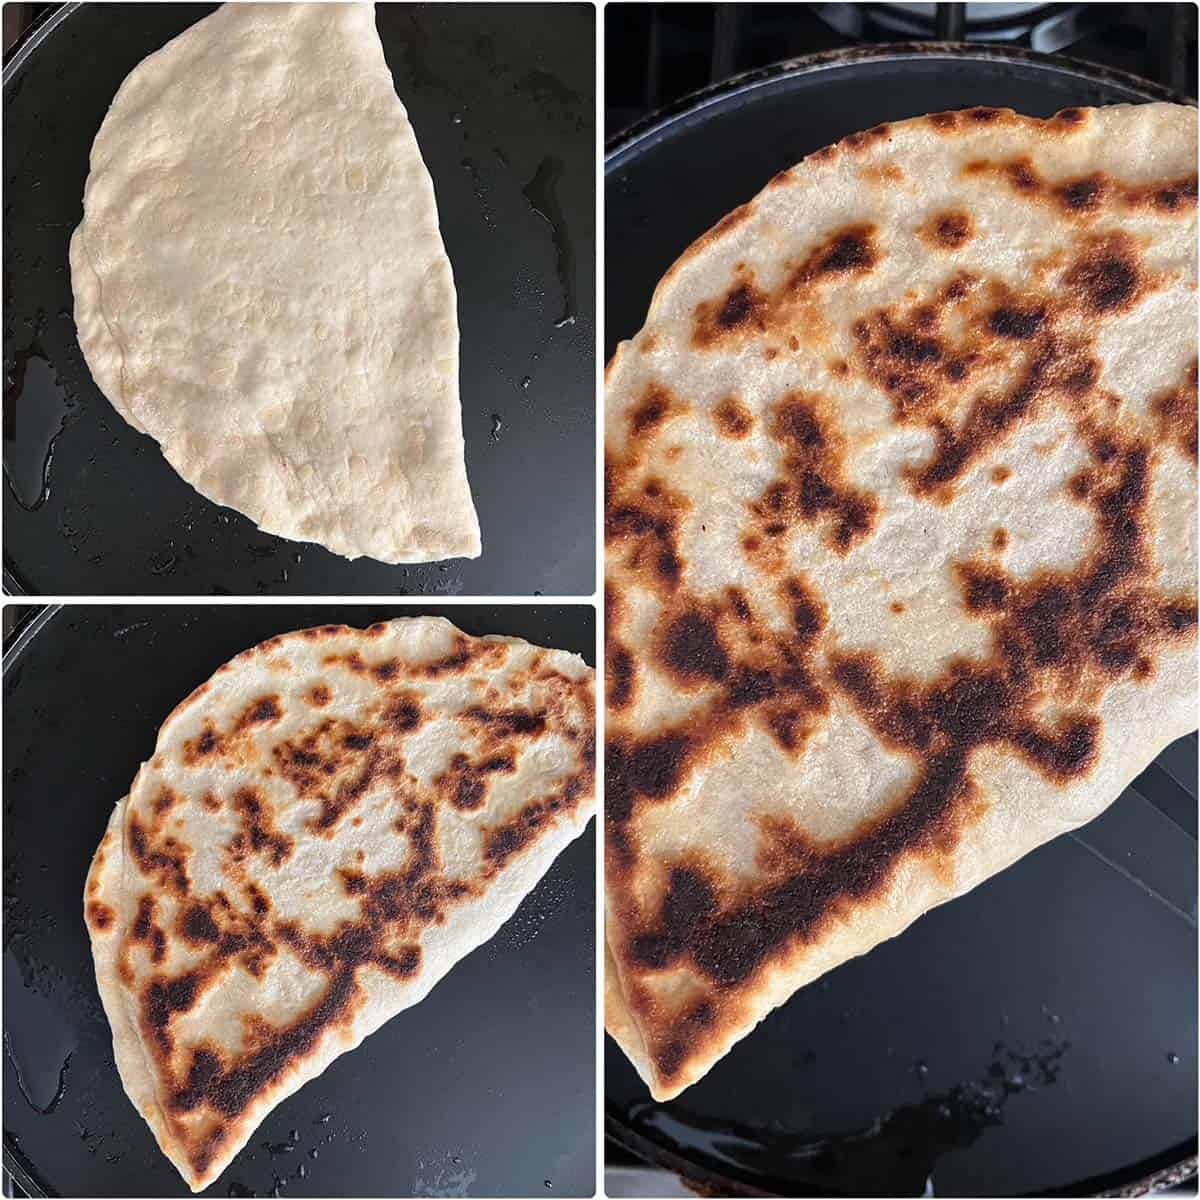 3 panel photo showing the cooking of flatbread on the tawa.